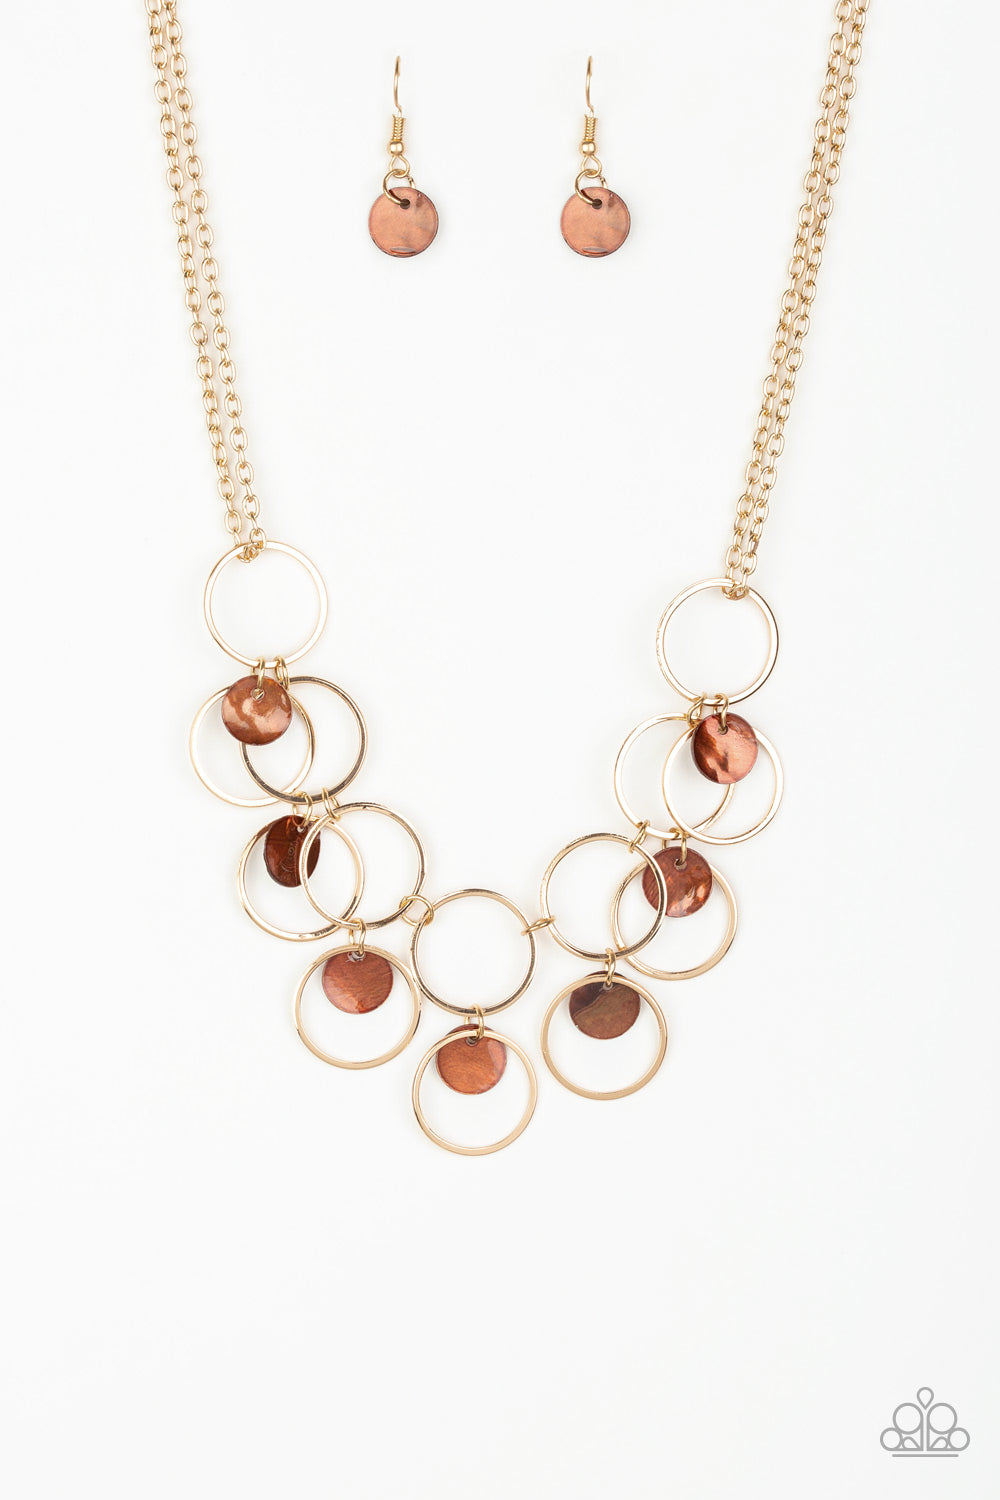 Ask and You SHELL Receive Brown Paparazzi Necklace Cashmere Pink Jewels - Cashmere Pink Jewels & Accessories, Cashmere Pink Jewels & Accessories - Paparazzi